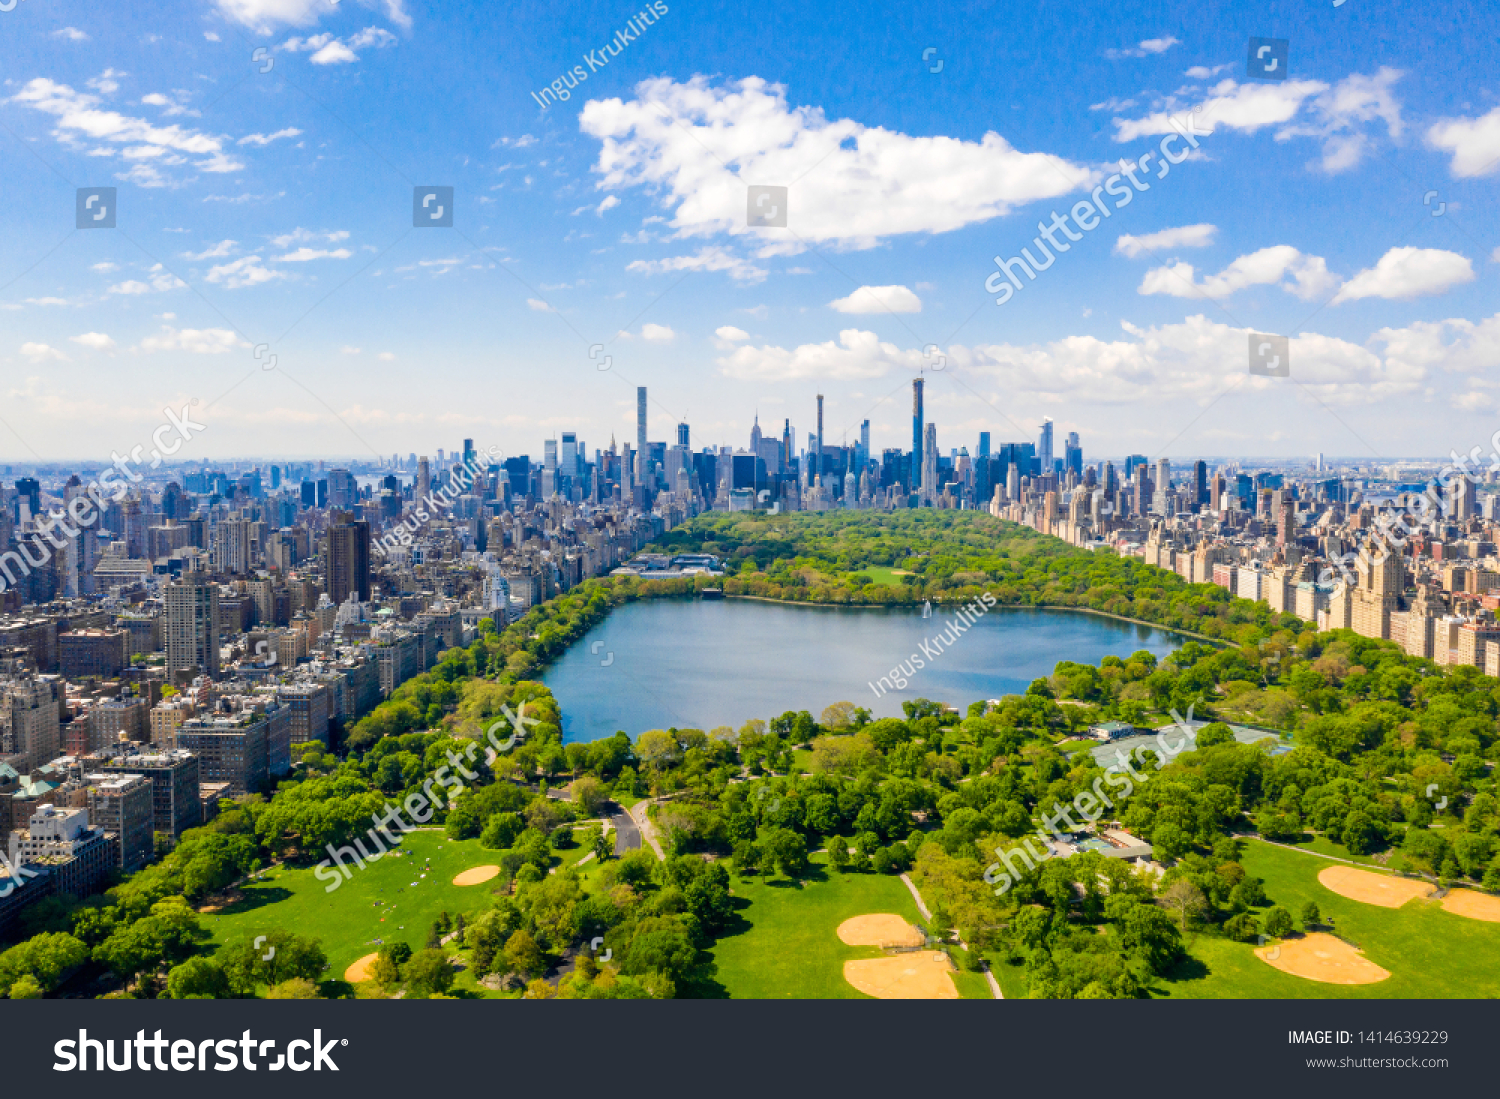 Aerial view of the Central park in New York with golf fields and tall skyscrapers surrounding the park. #1414639229